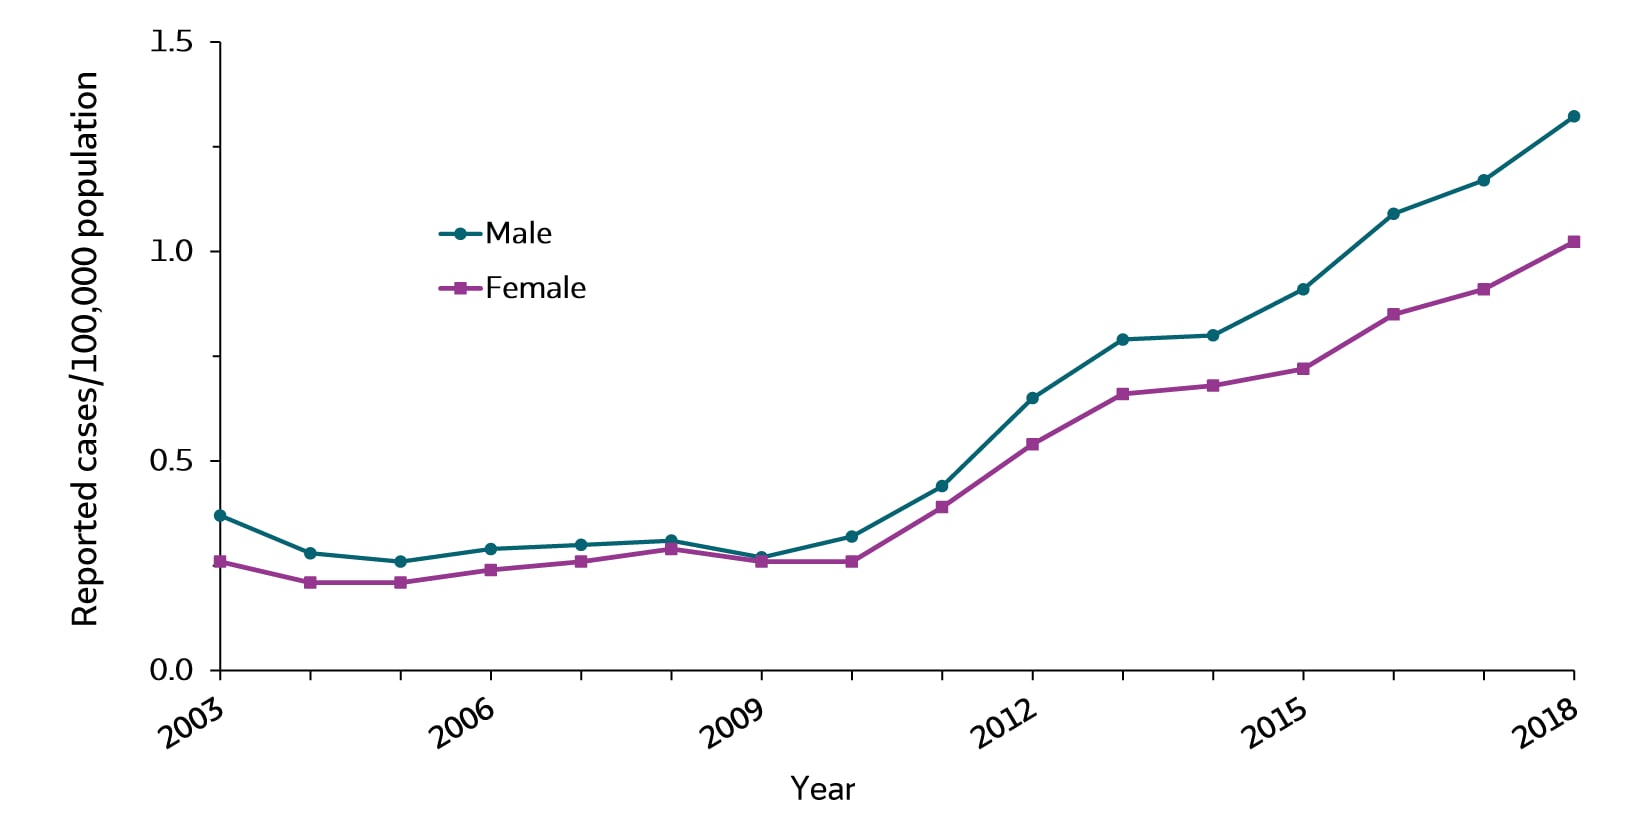 Figure 3.5. This line graph displays trends in rates of acute hepatitis C for males and females from 2003 through 2018. From 2010 through 2020, the rates of acute hepatitis C have increased for both males and females.  Rates for males were higher than rates for females for all years except 2008 and 2009 when the rates were close.